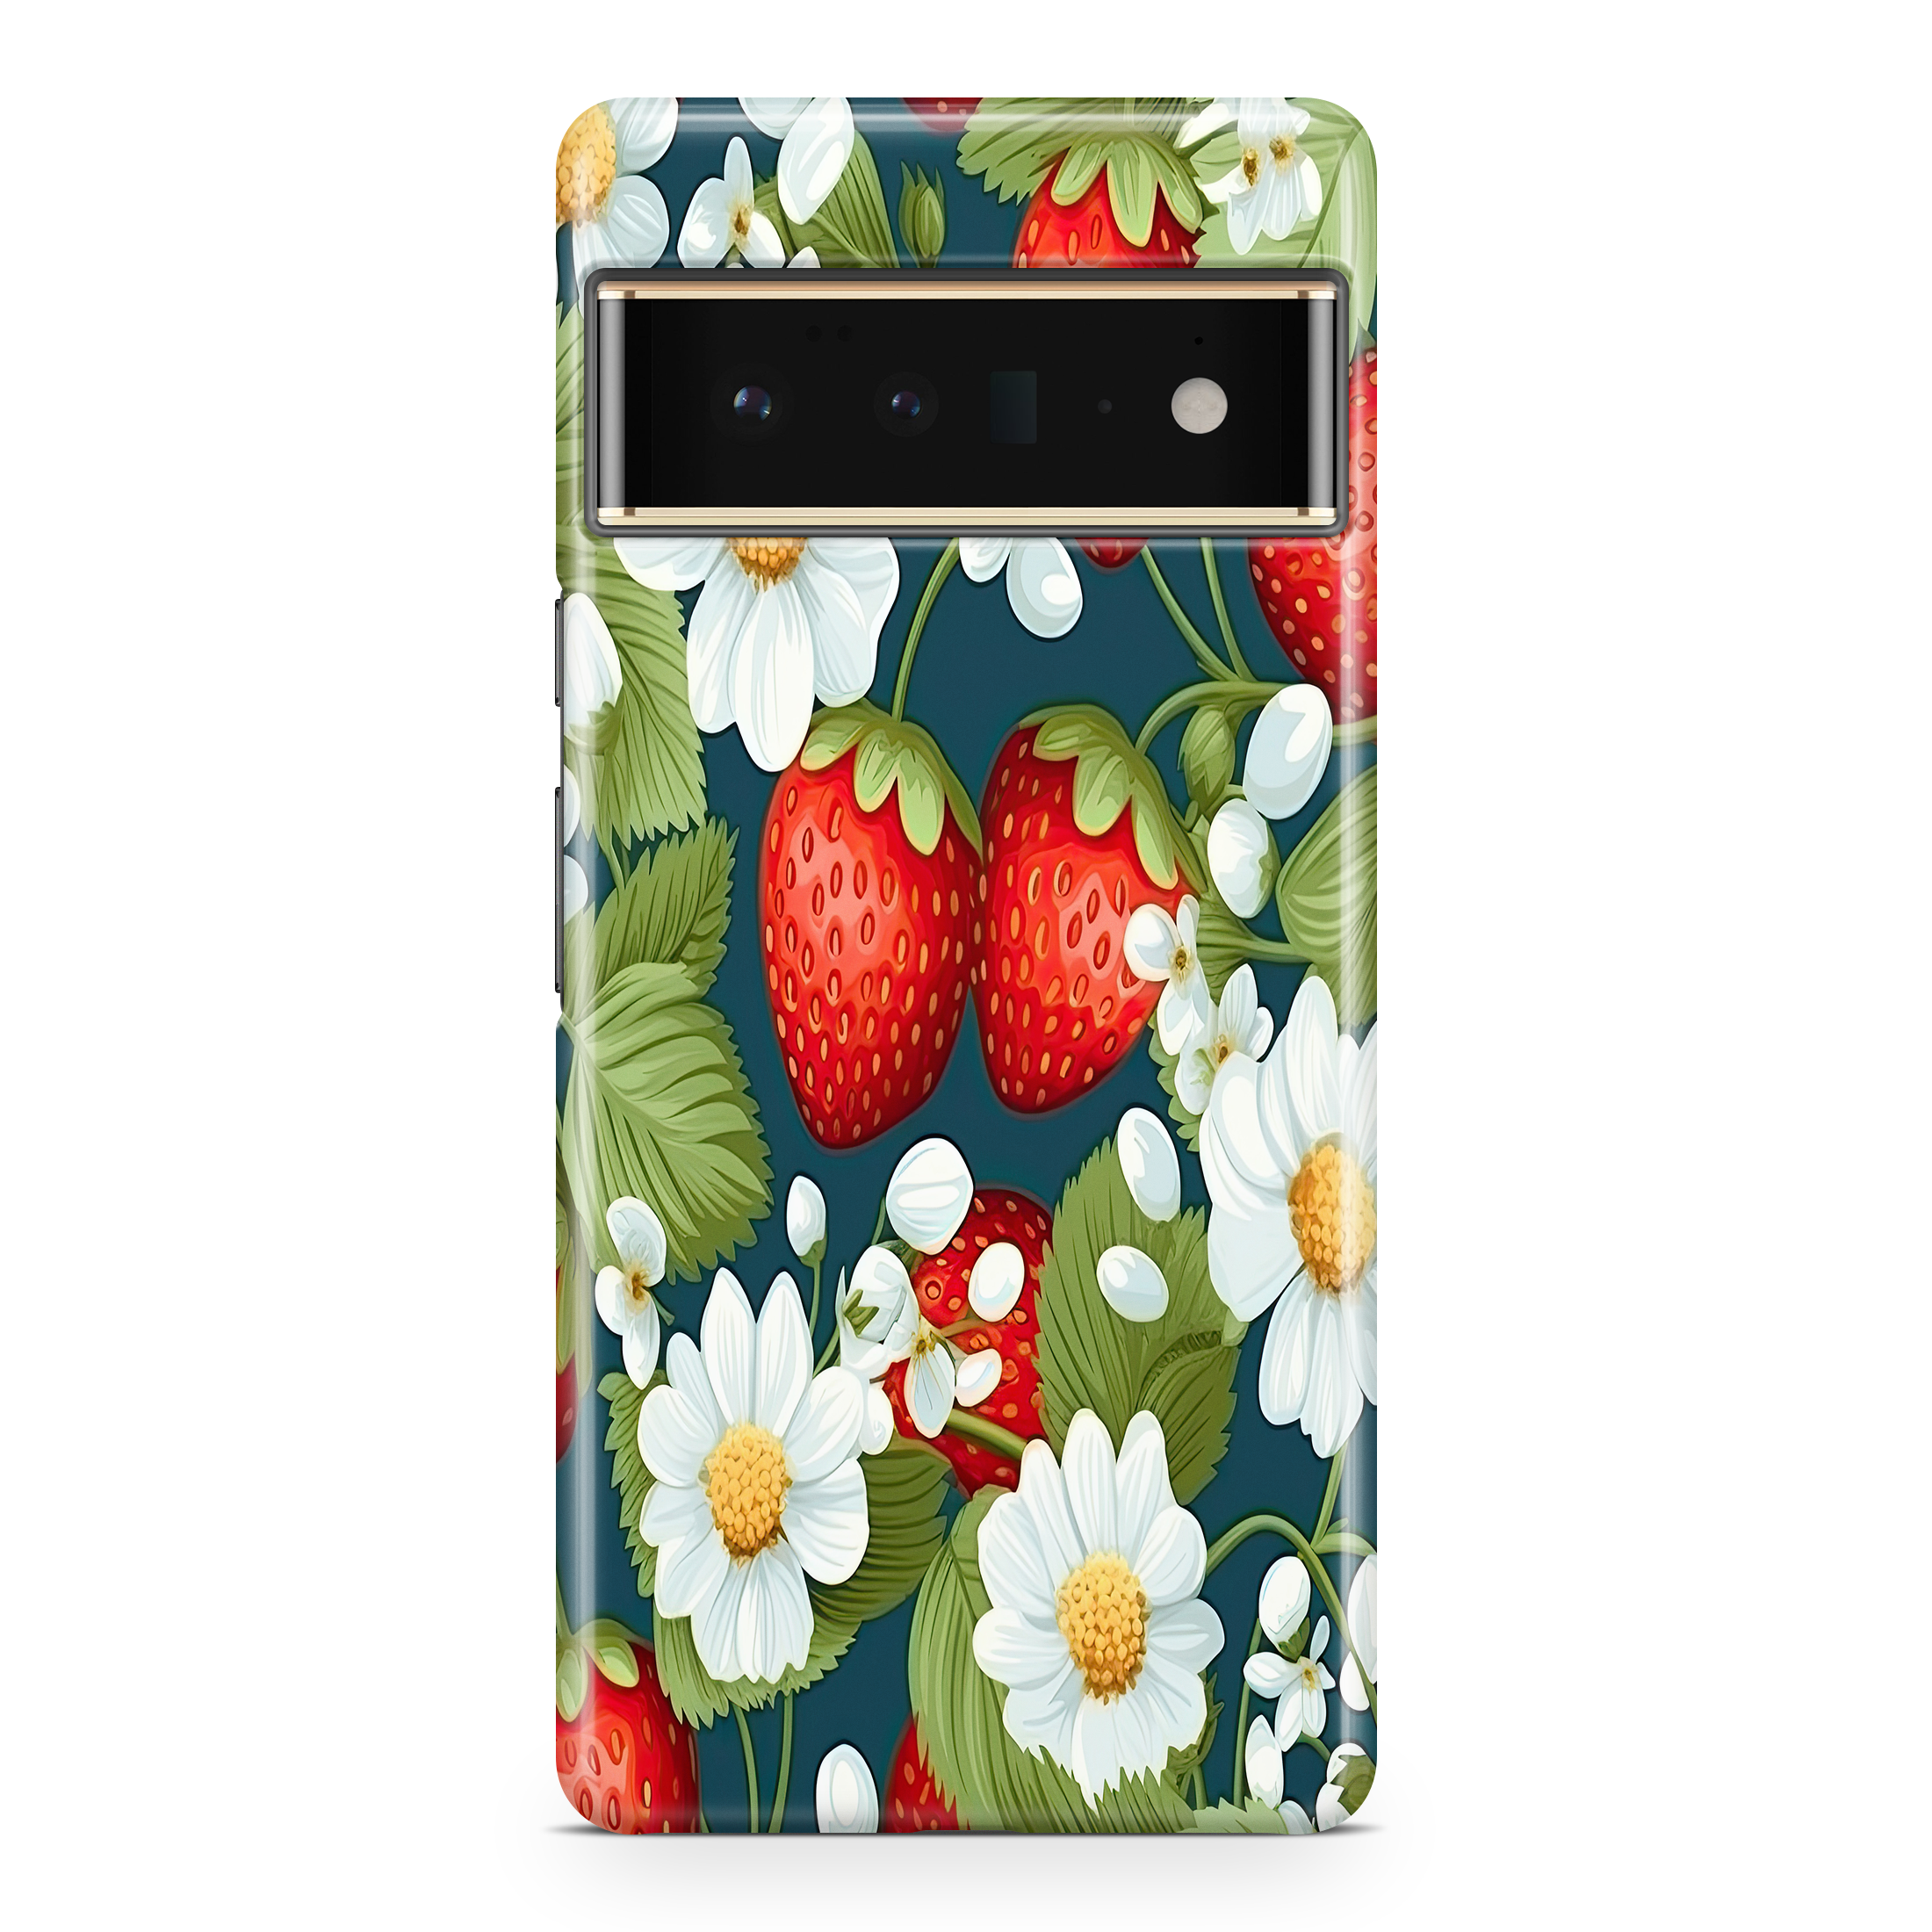 Strawberry Vine Oasis - Google phone case designs by CaseSwagger